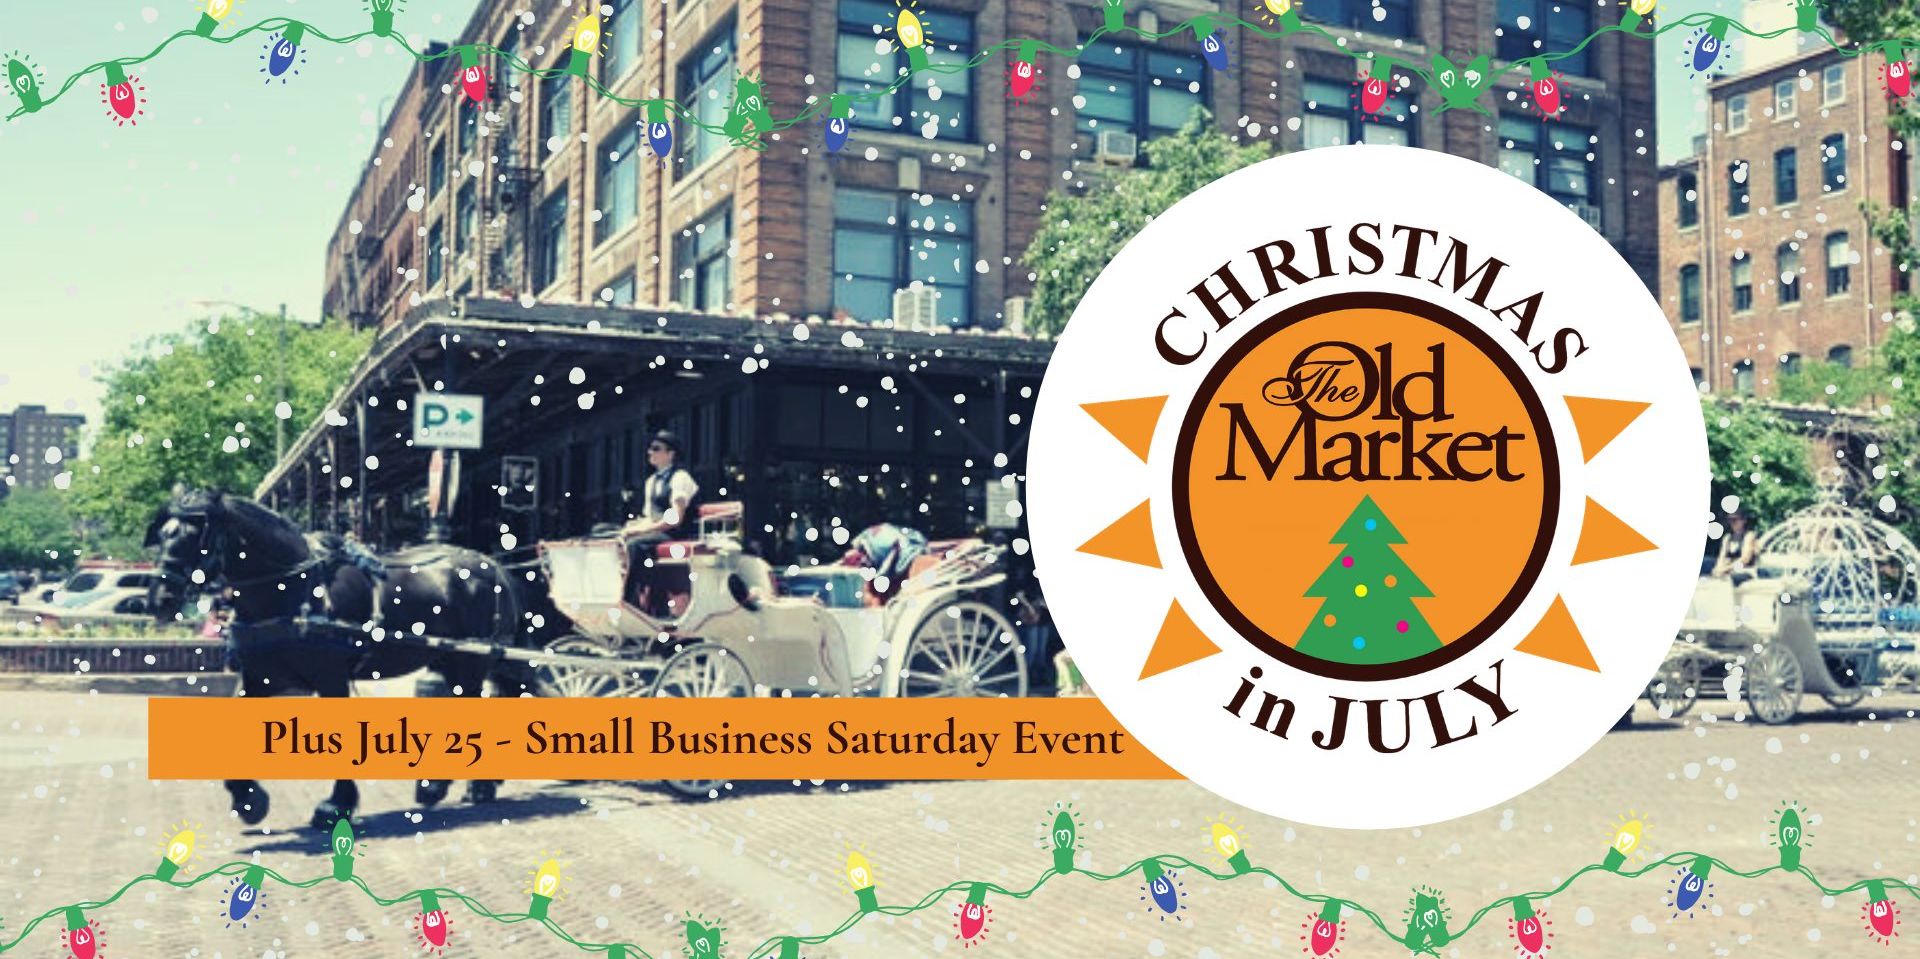 Old Market Christmas in July promotional image